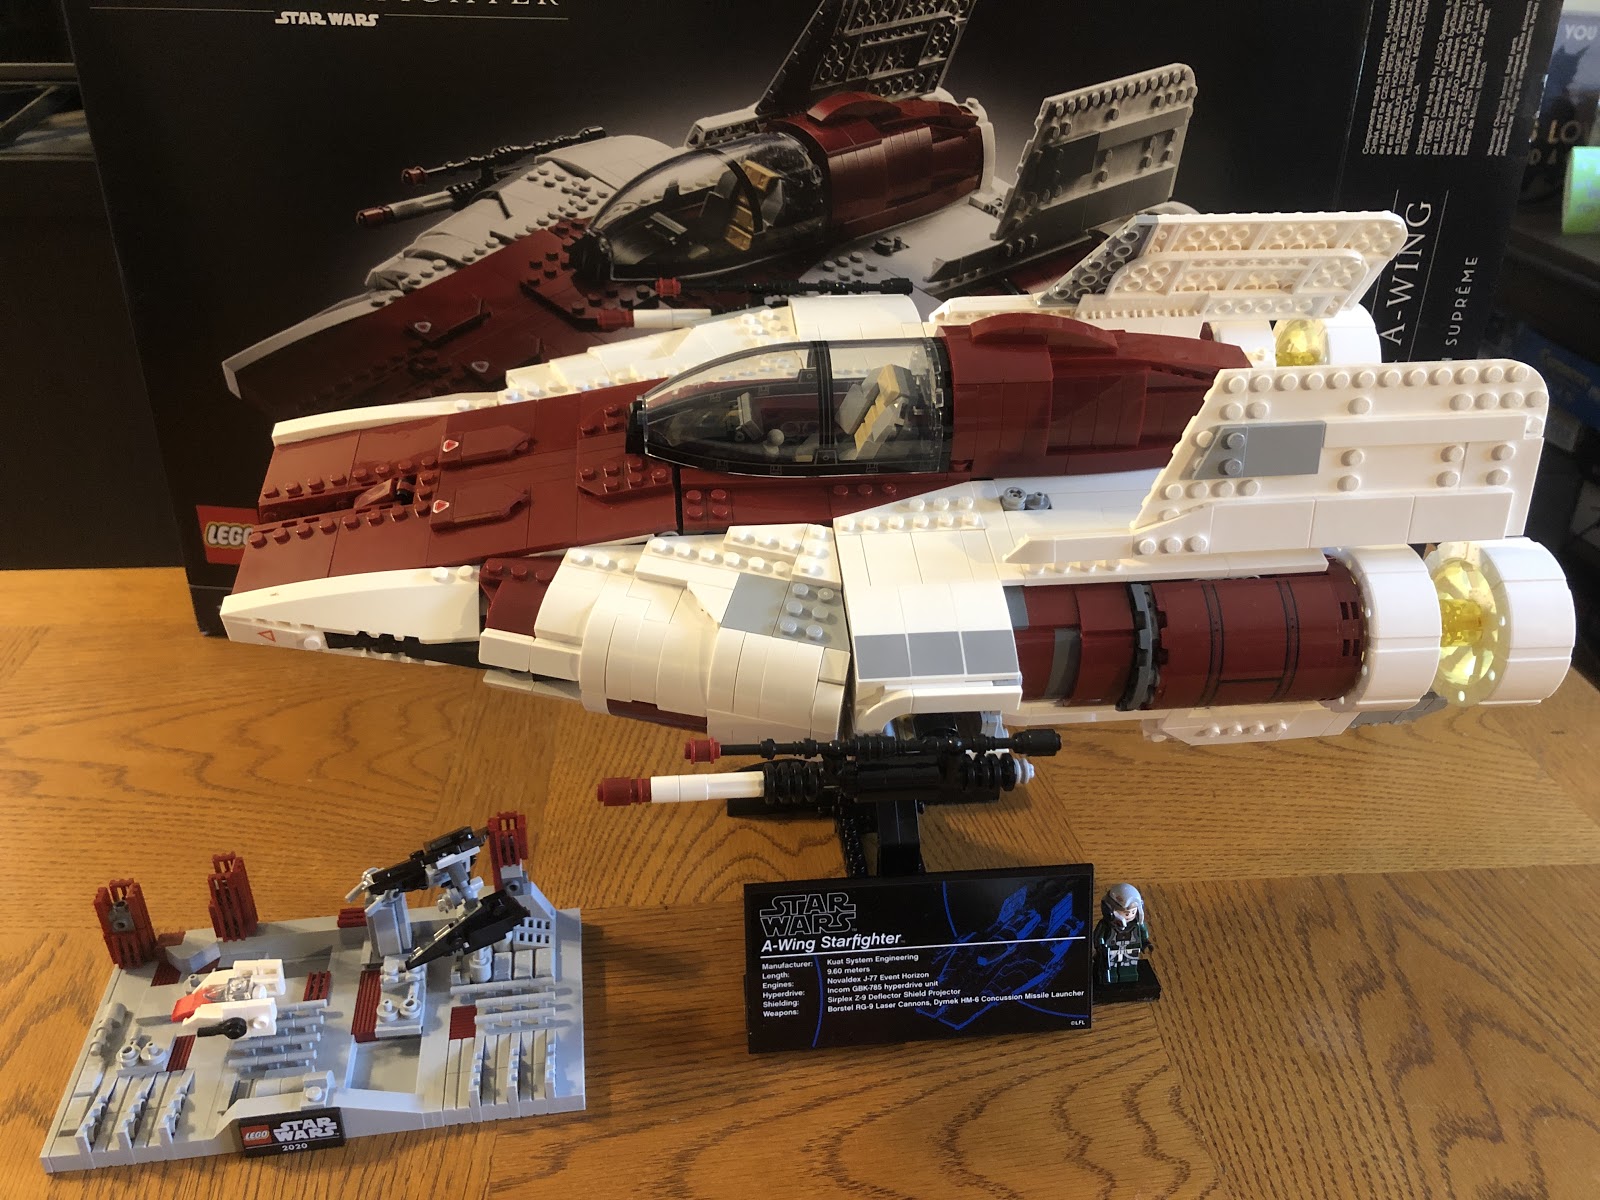 LEGO X-Wing Starfighter – Star Wars – Ultimate Collector Series